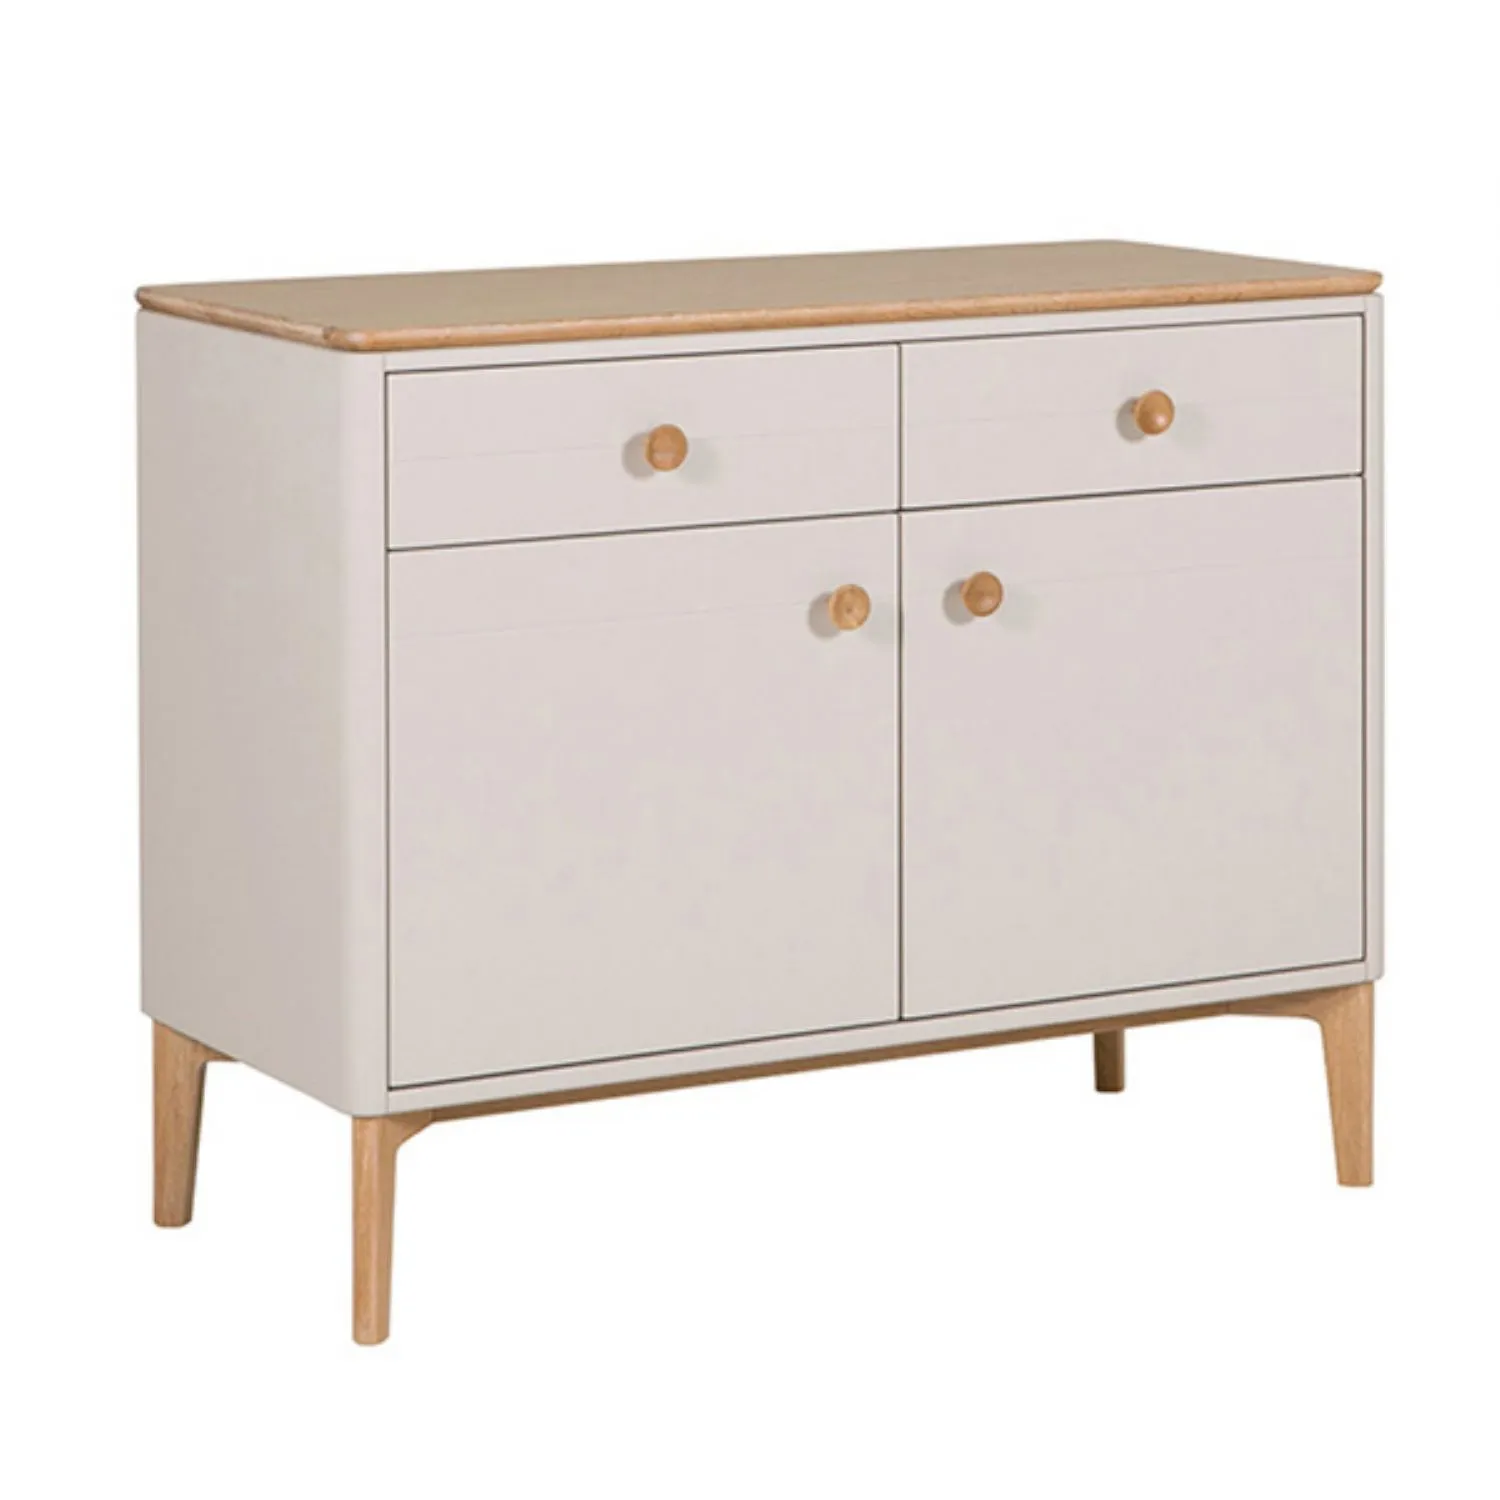 Taupe Wooden Small 2 Door 2 Drawer Sideboard